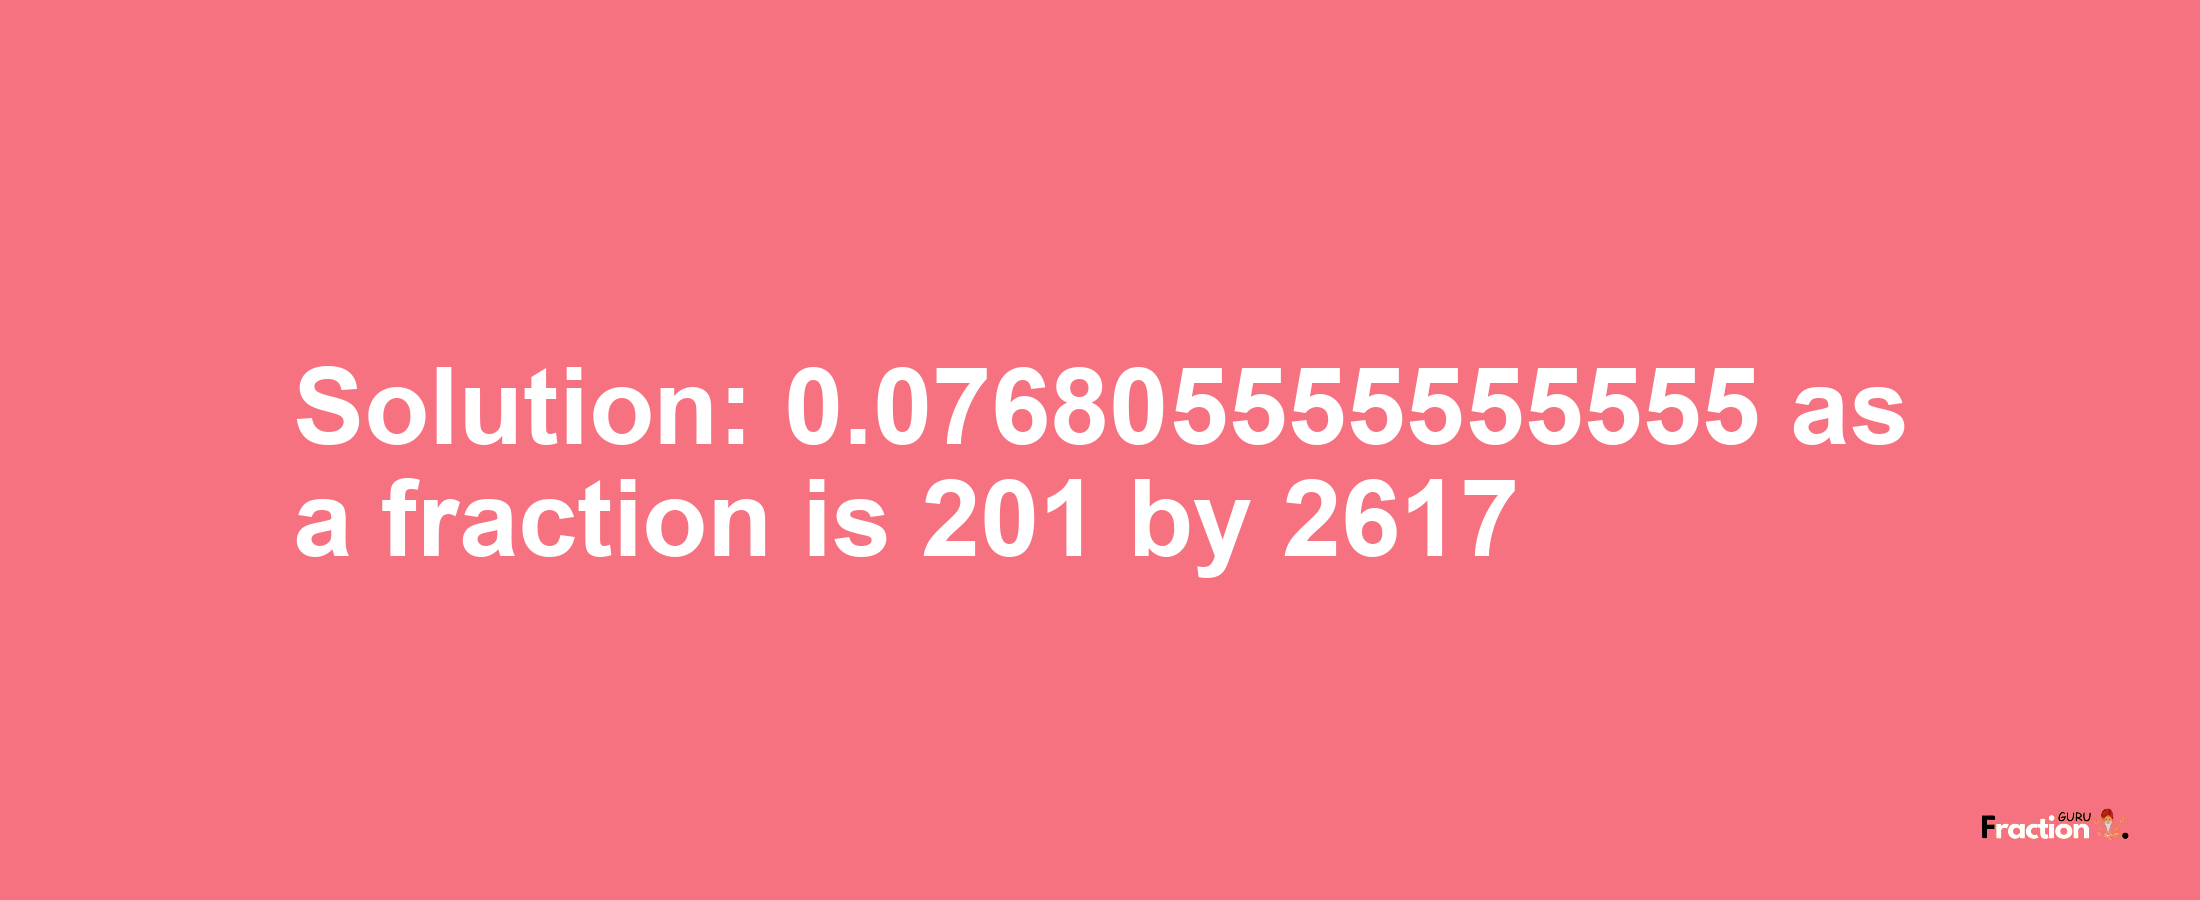 Solution:0.076805555555555 as a fraction is 201/2617